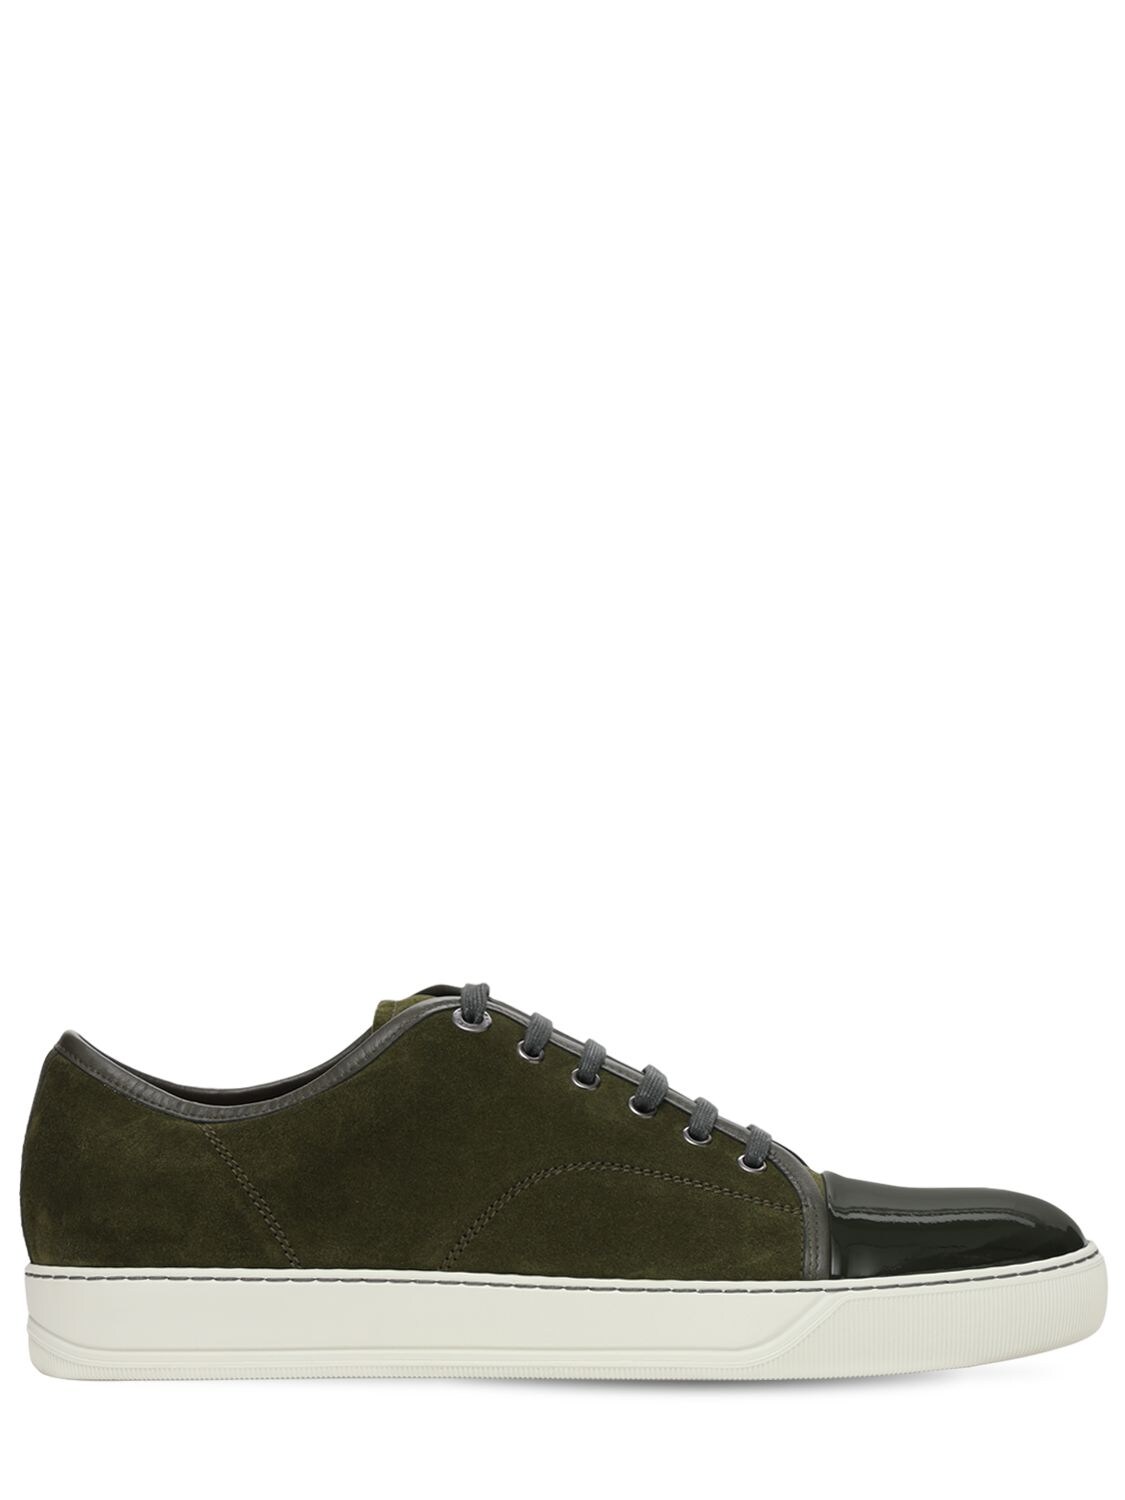 LANVIN LEATHER & SUEDE SNEAKERS,73IG0F003-NDC1